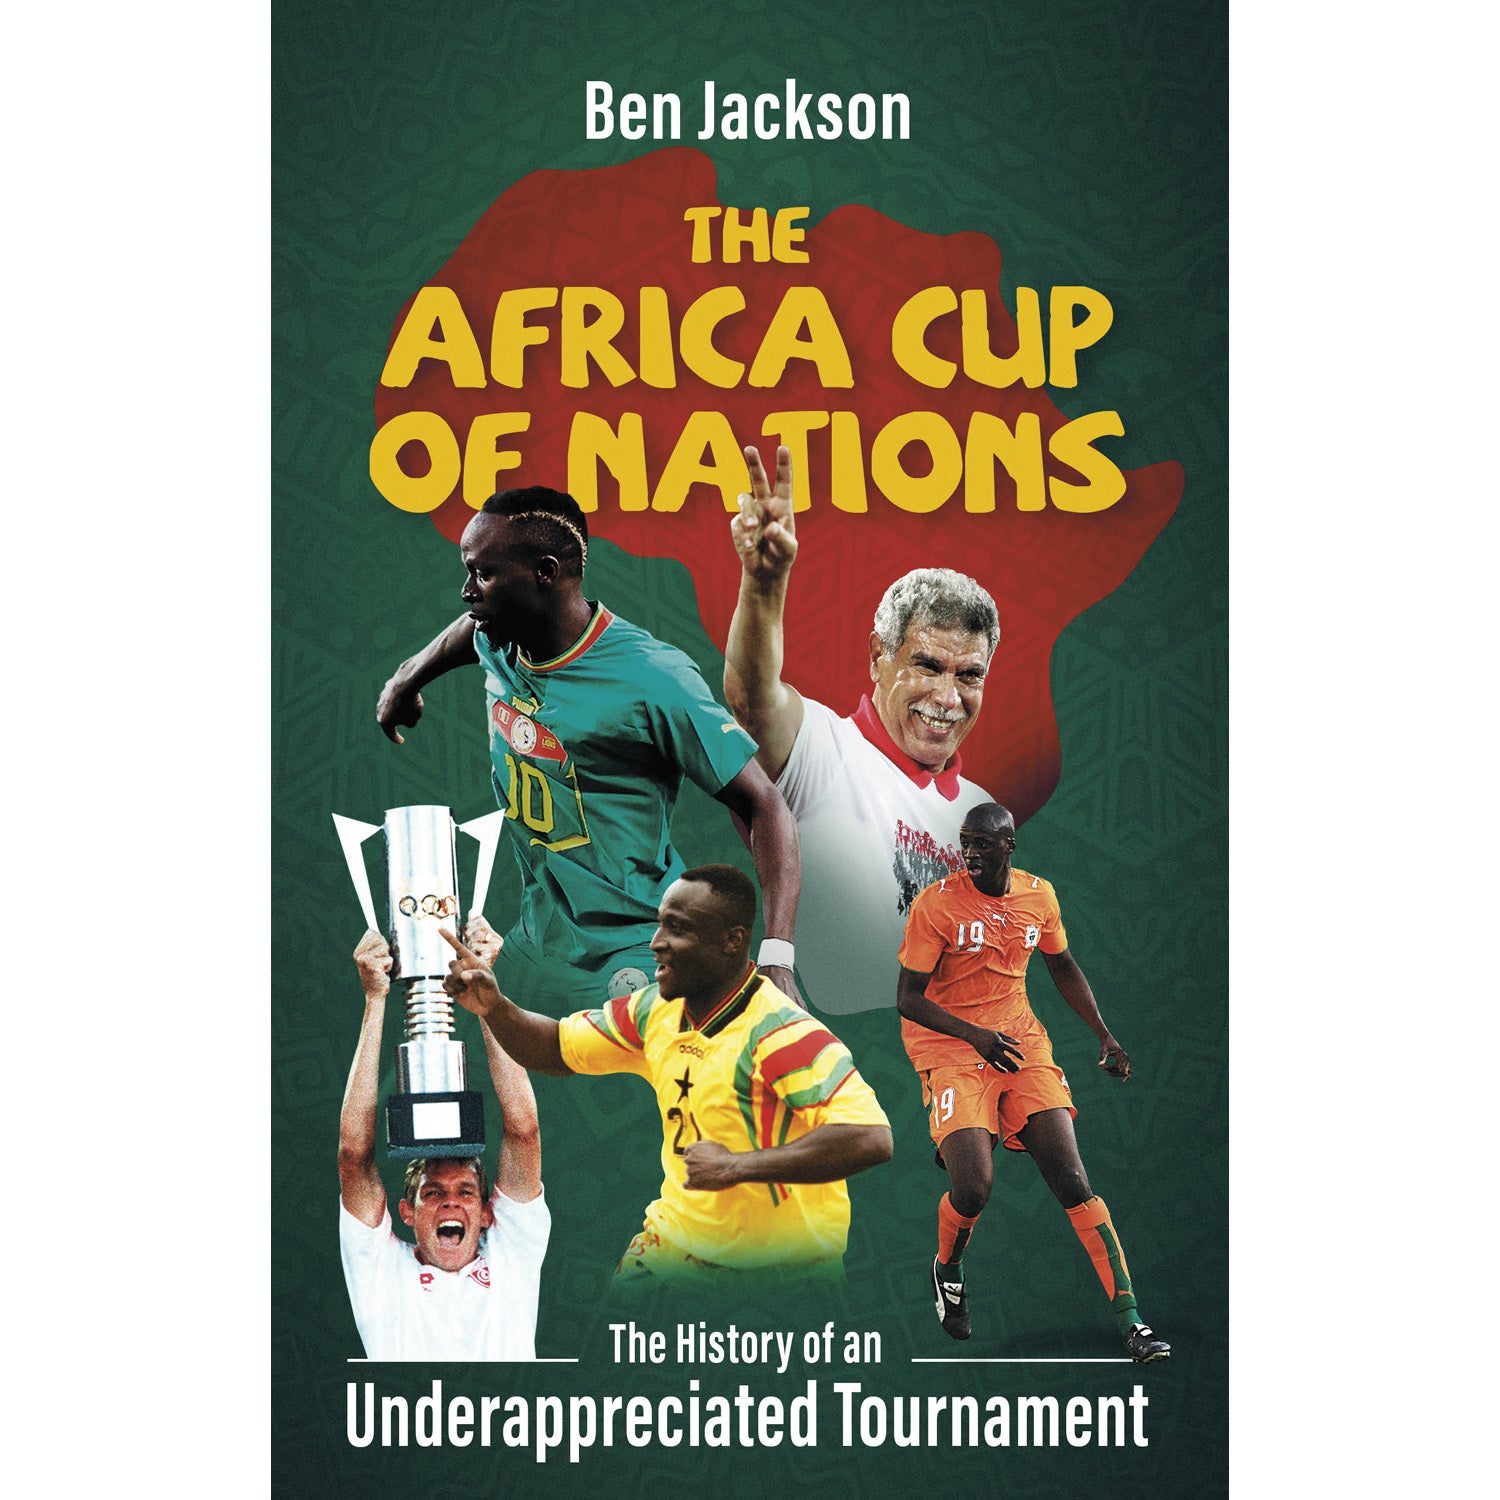 The Africa Cup of Nations – The History of an Underappreciated Tournament